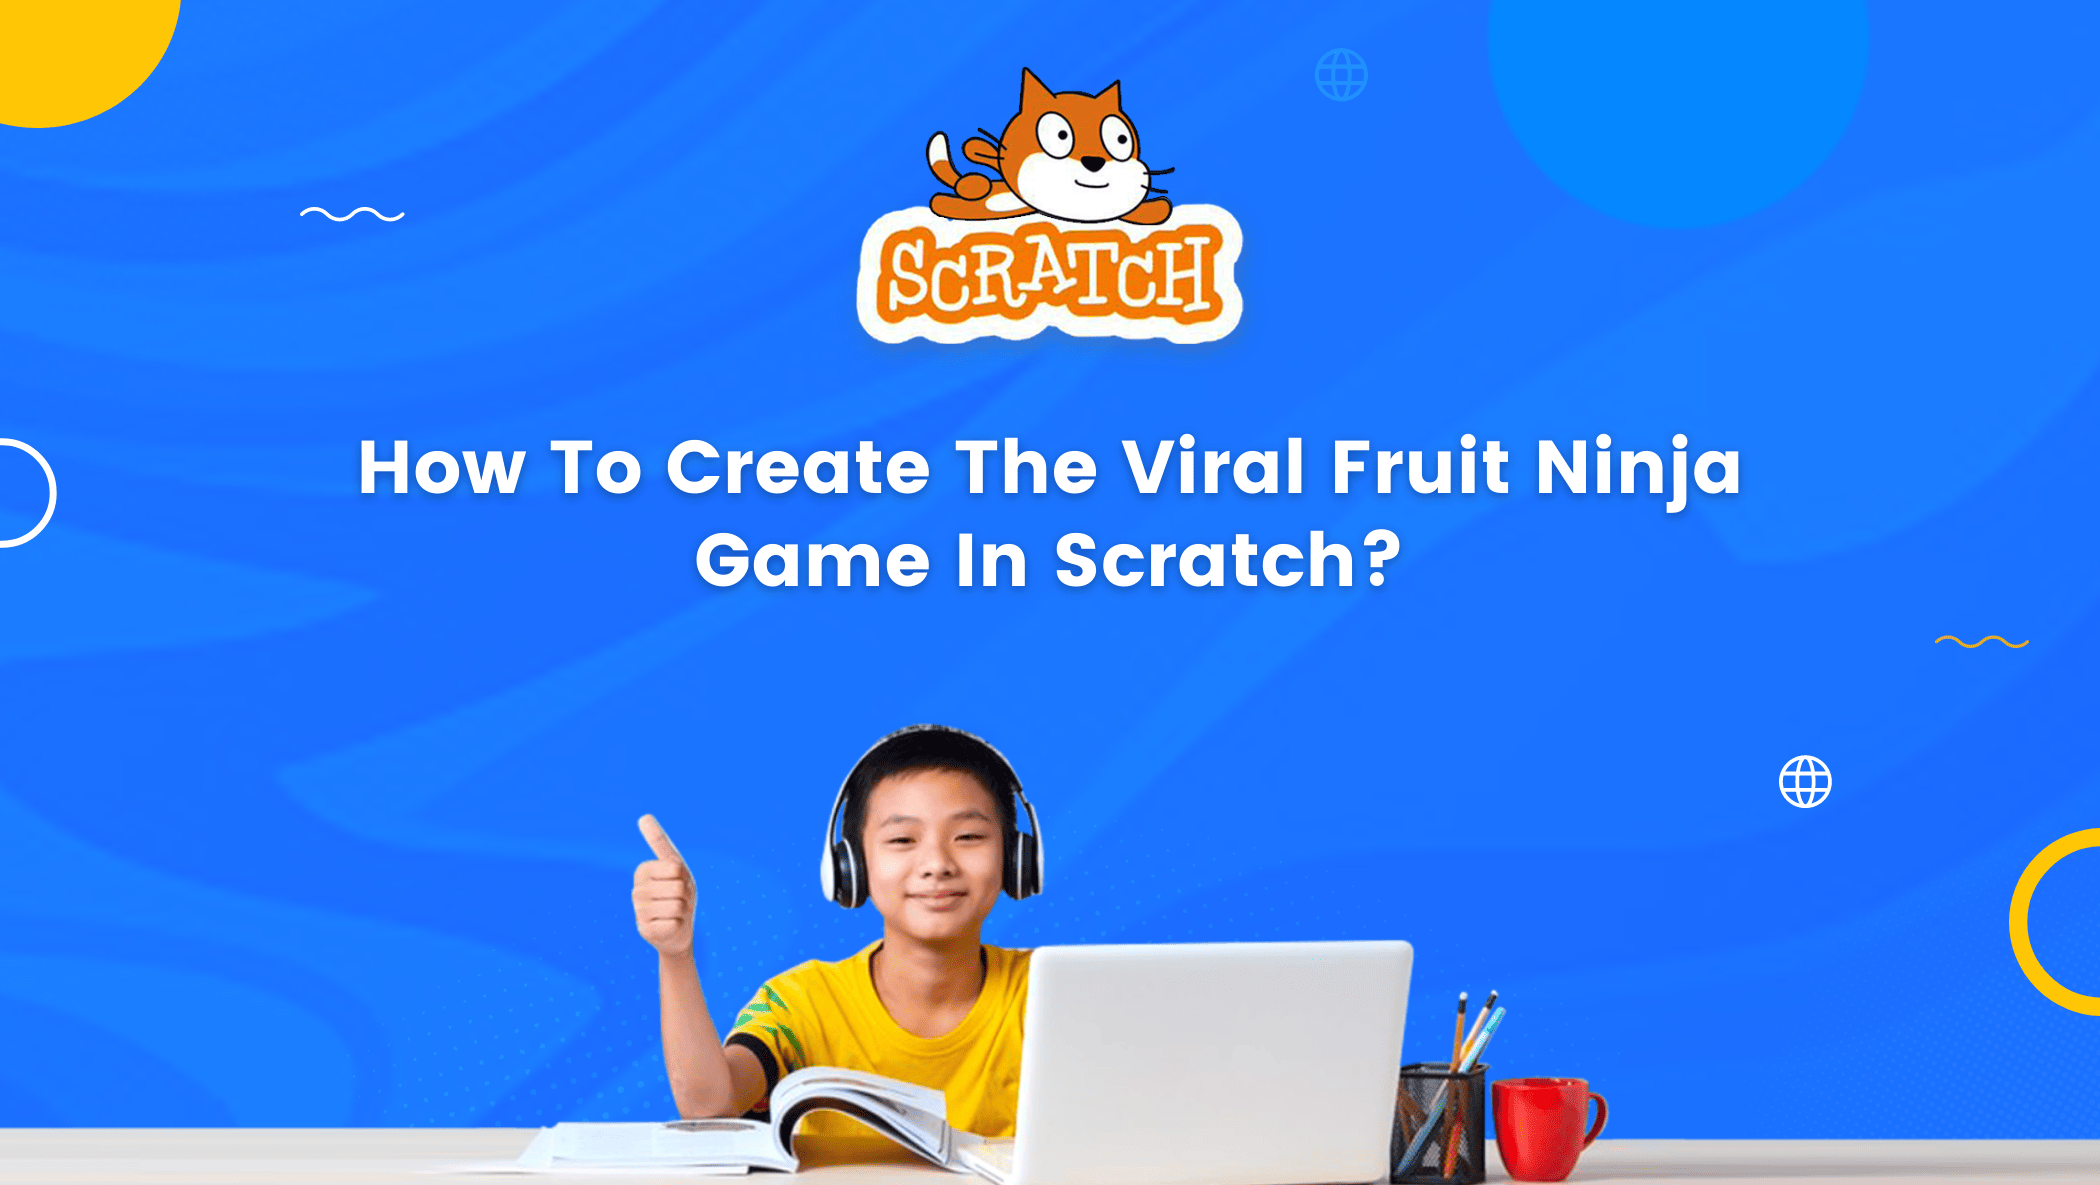 How To Create The Viral Fruit Ninja Game In Scratch